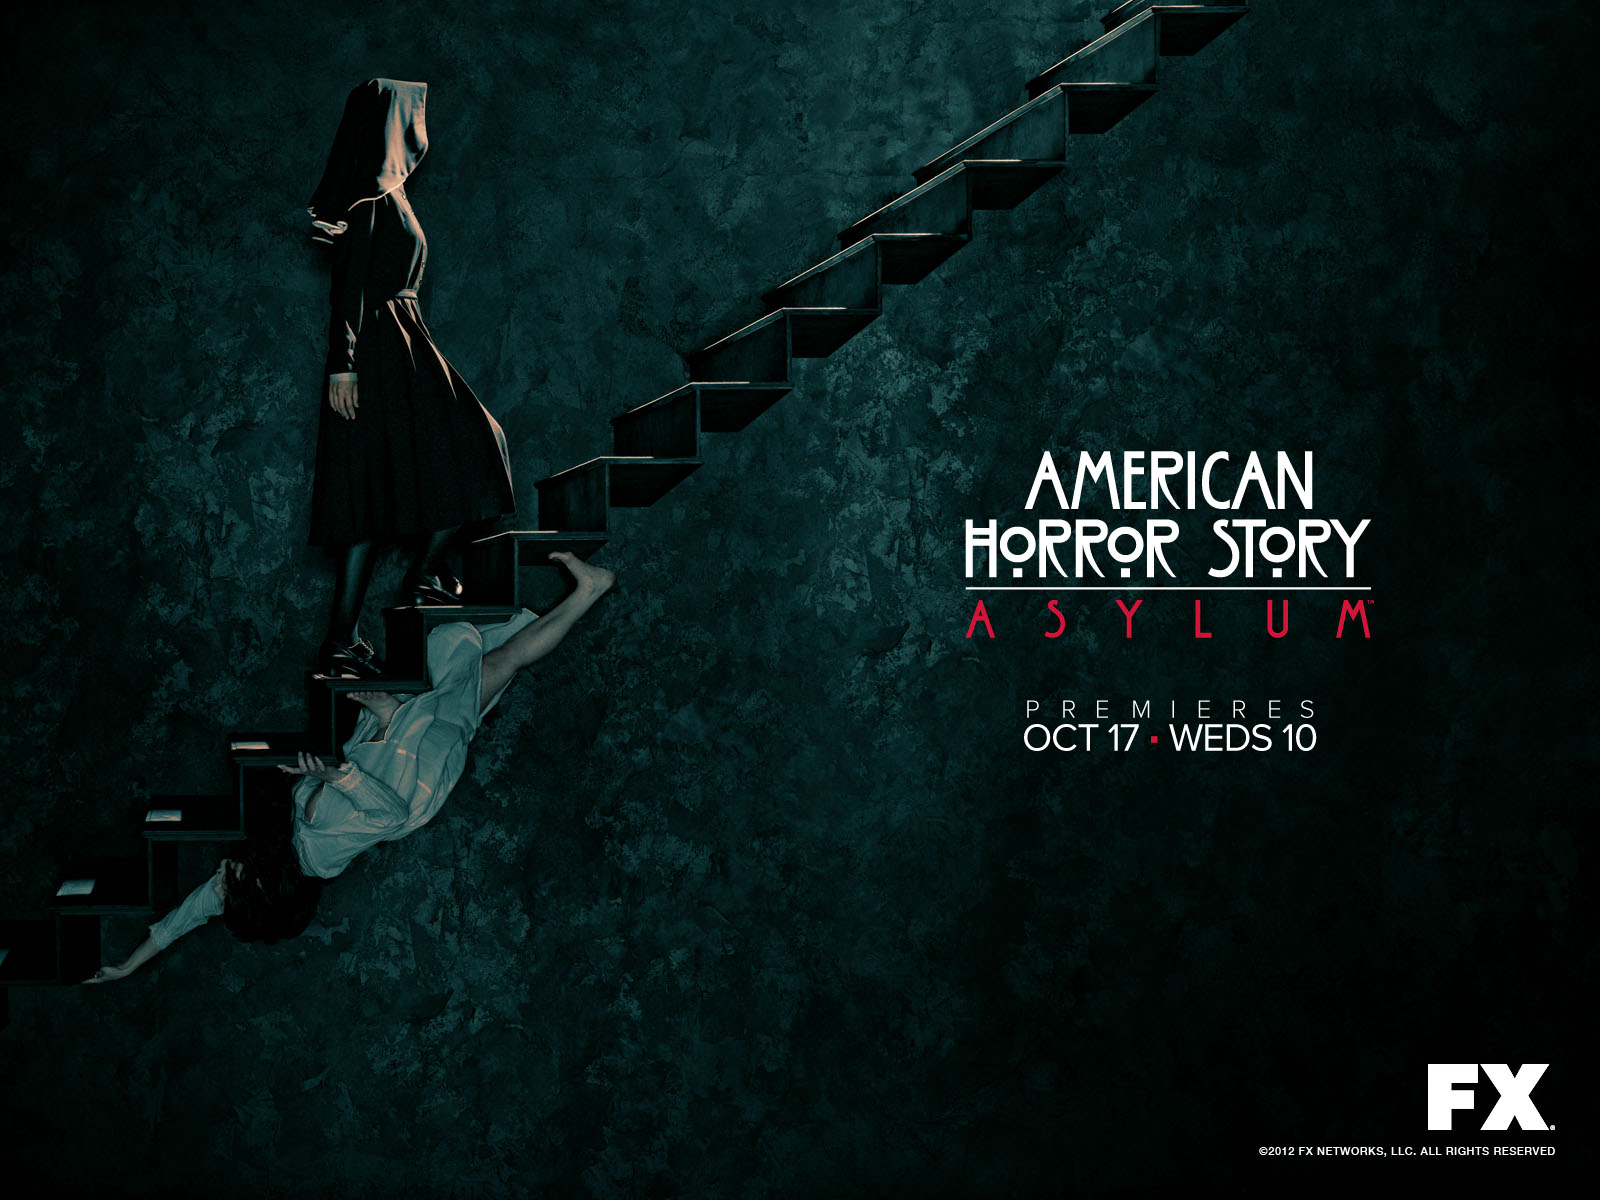 Wallpaper American Horror Story Asylum Geekeries Back To The